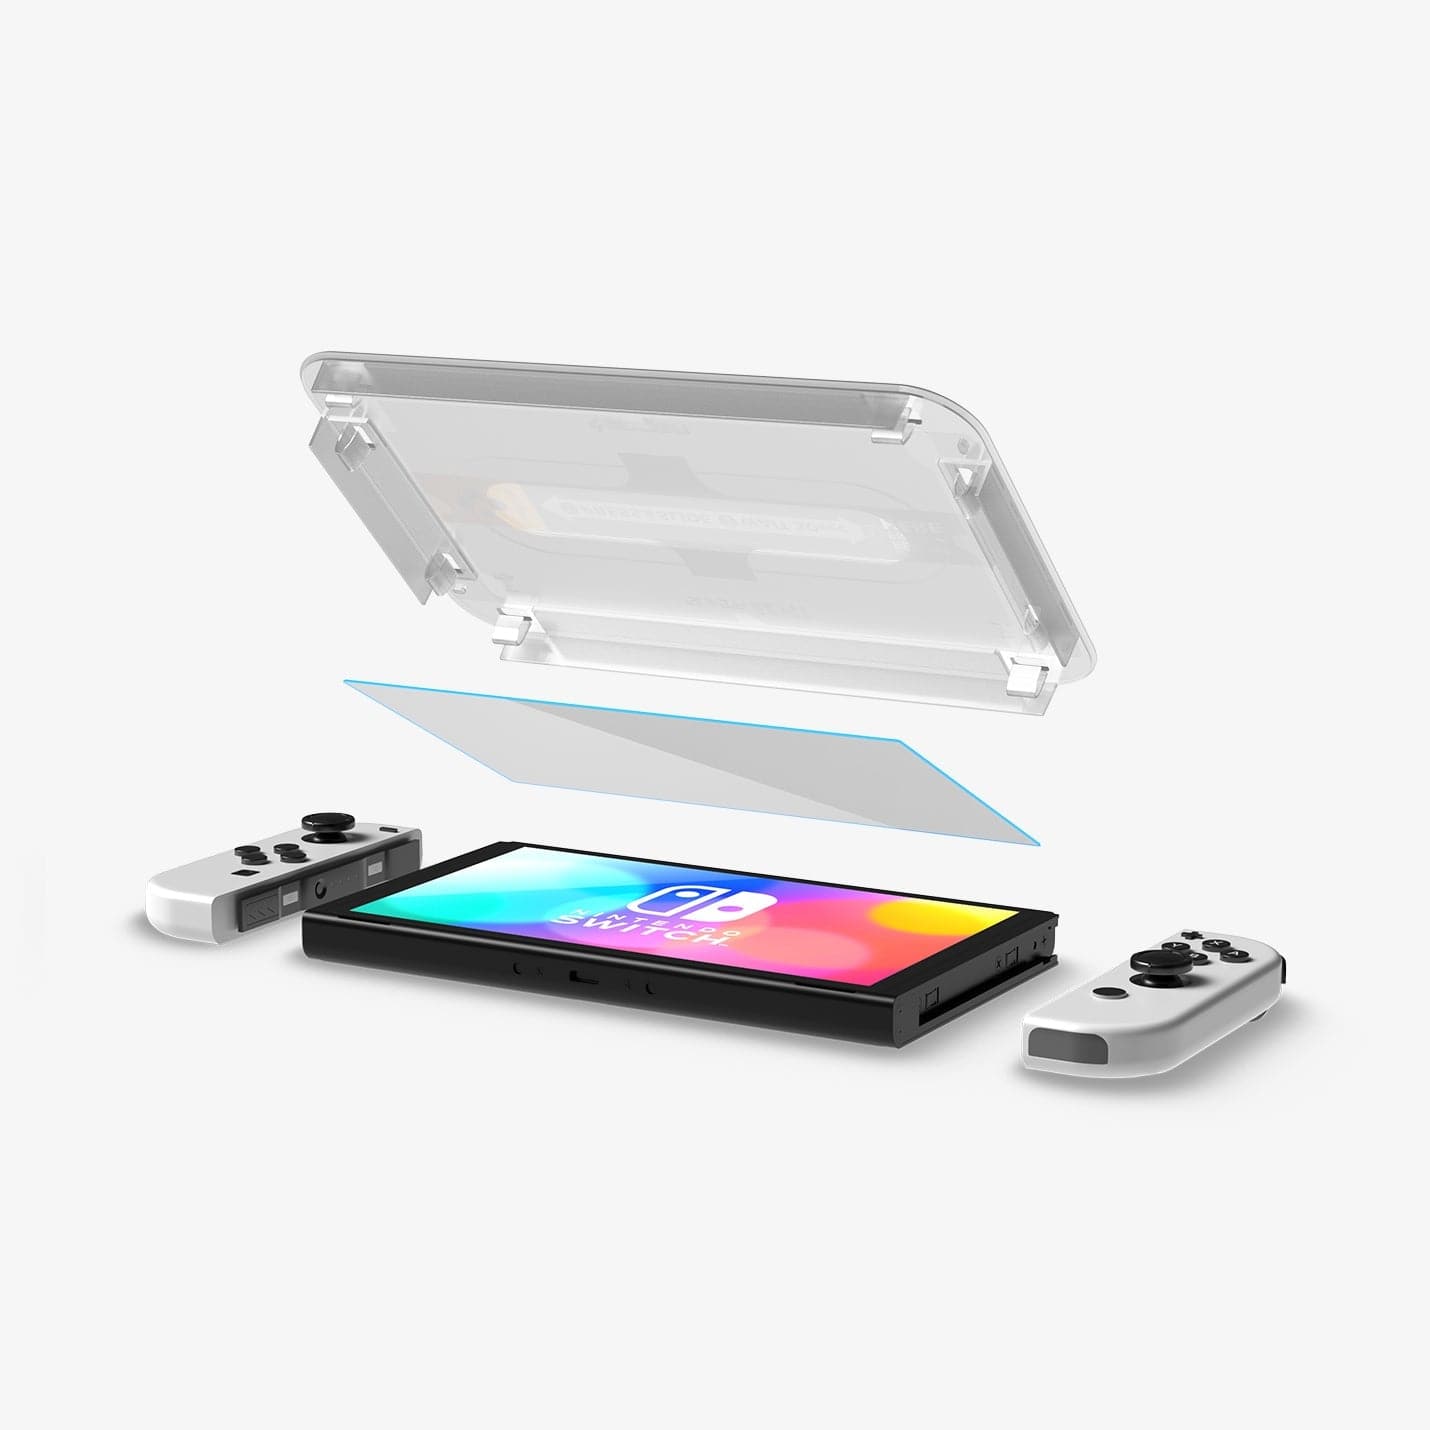 AGL03829 - Nintendo Switch OLED Screen Protector EZ Fit GLAS.tR showing the ez fit tray and screen protector being installed onto device